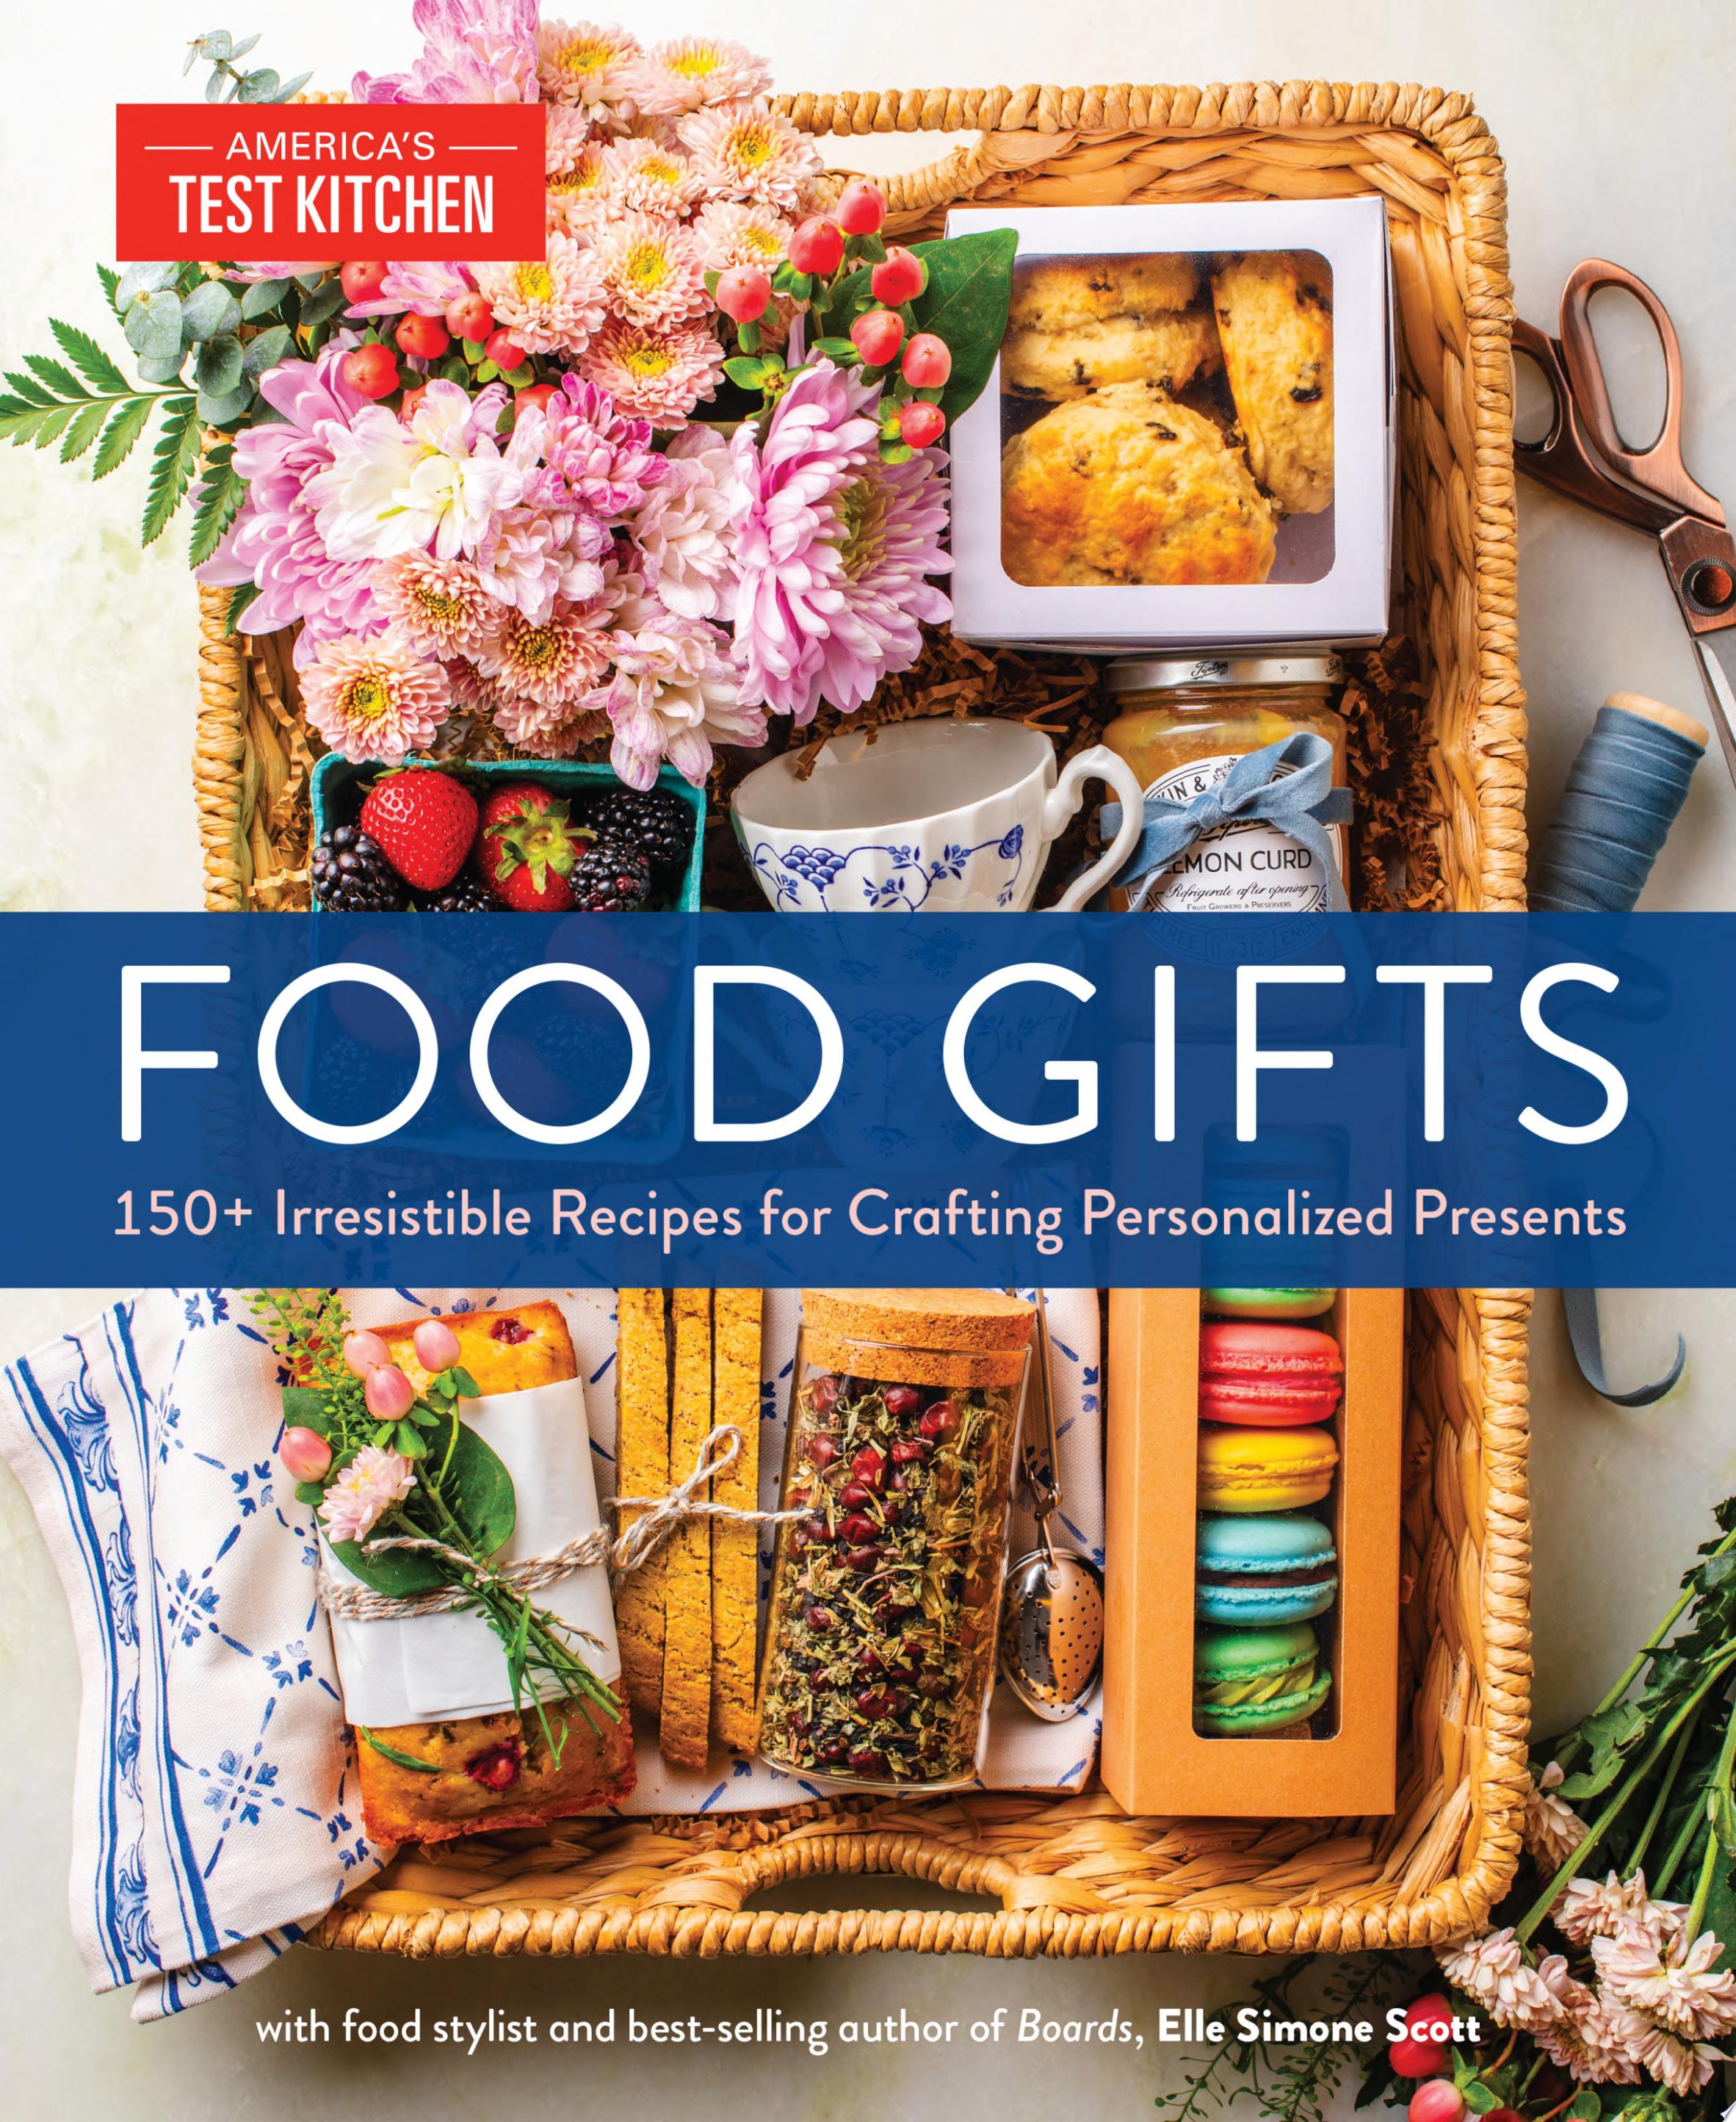 Image for "Food Gifts"